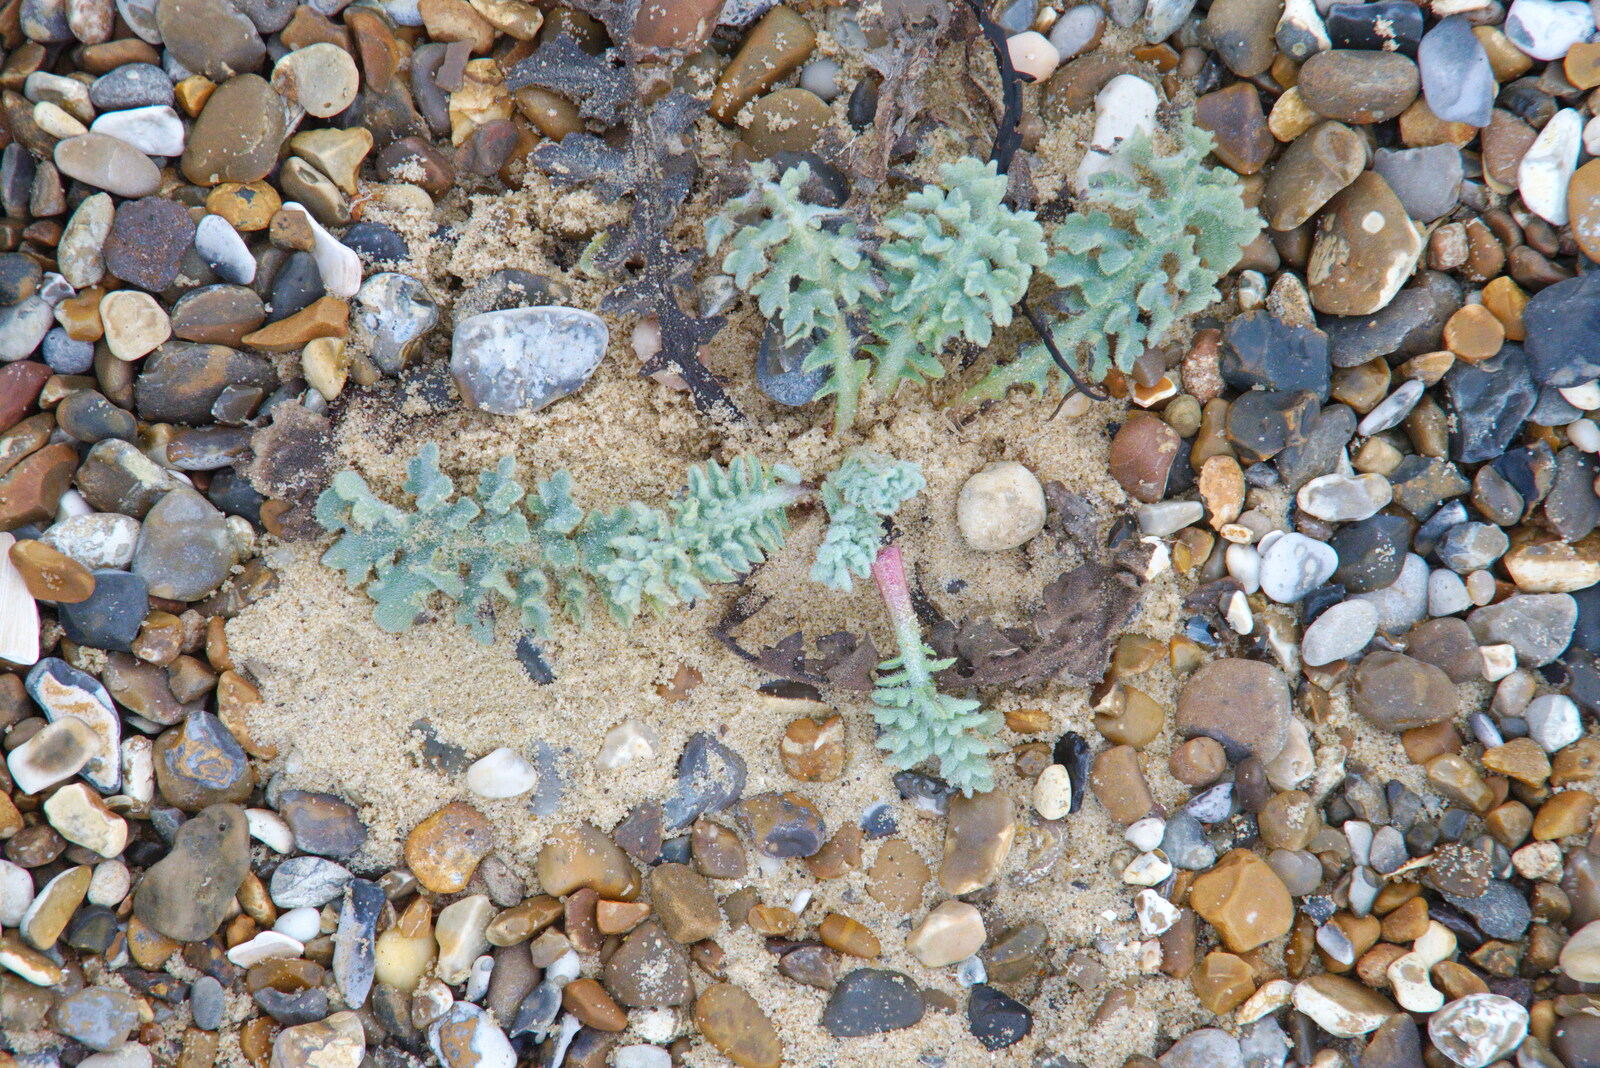 Some sort of sea plant from A Trip to the Beach, Dunwich Heath, Suffolk - 27th December 2019